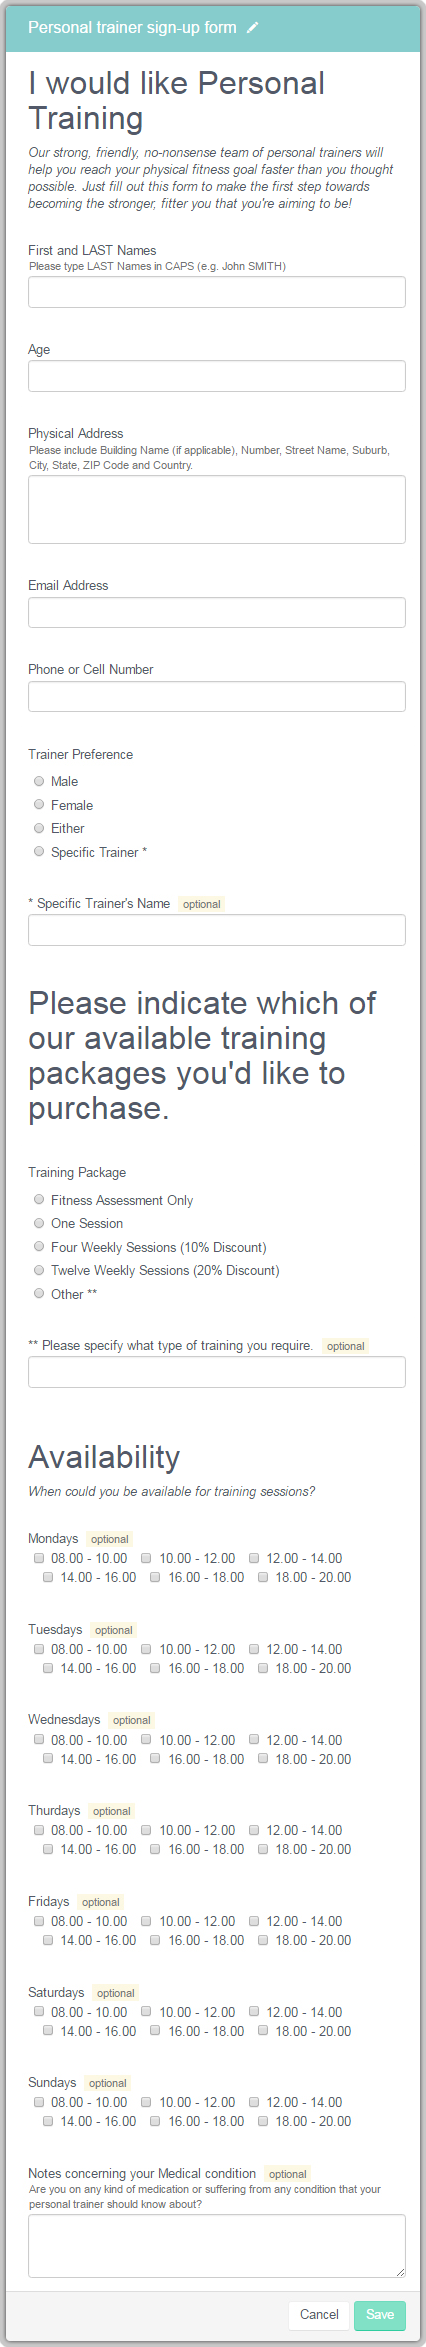 Signing up for personal trainer sessions